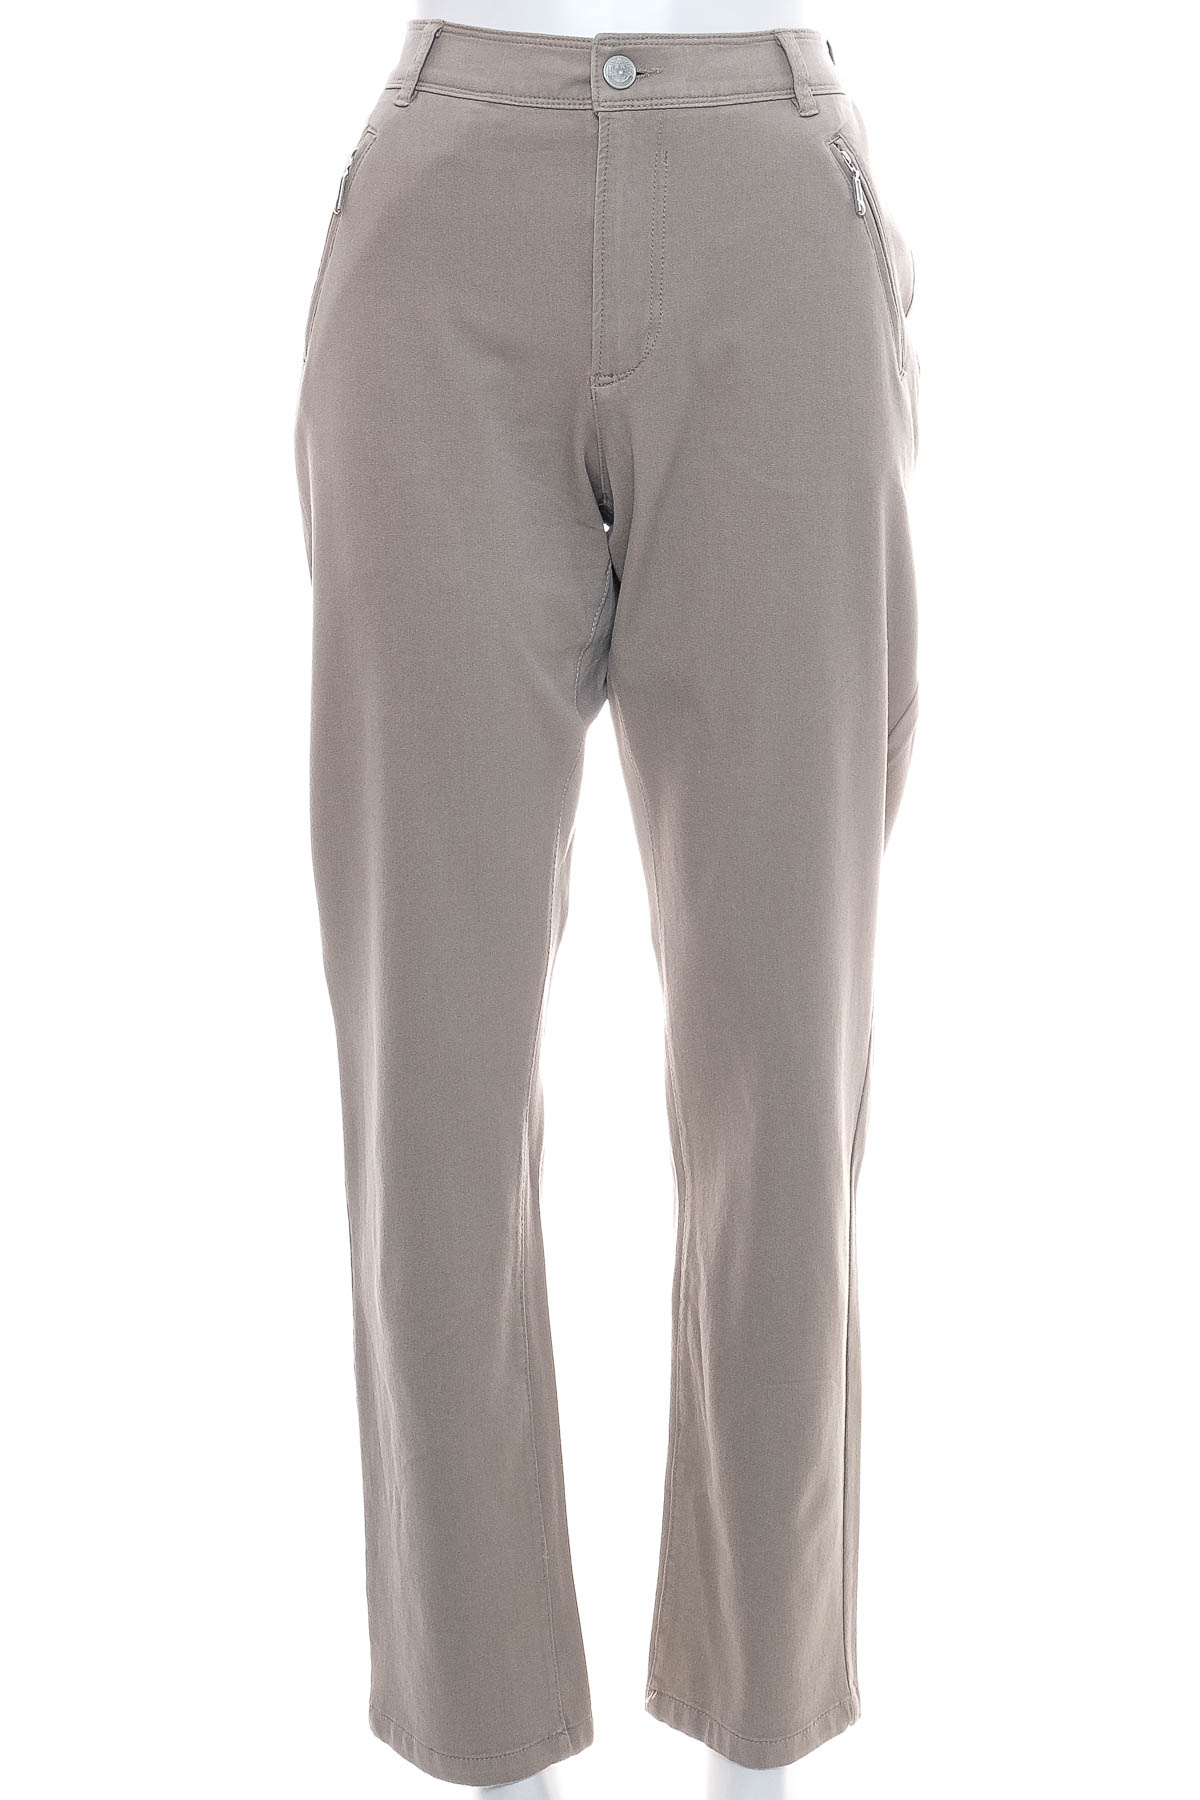 Women's trousers - Charles Vogele - 0